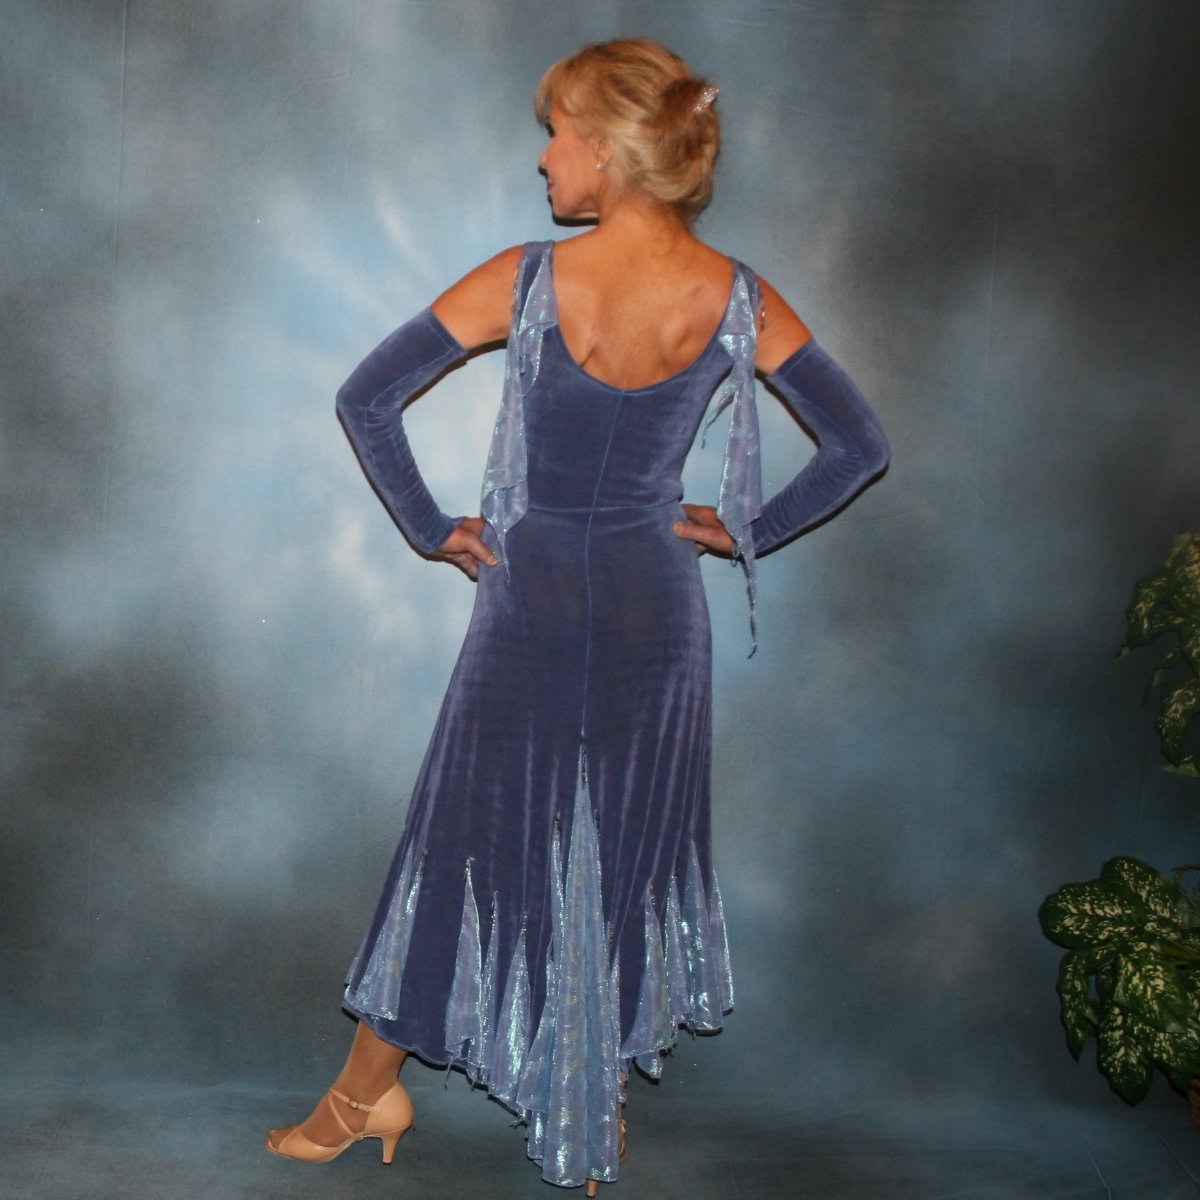 Crystal's Creations back view of Beautiful slate blue classic ballroom dress with princess seaming, created in luxurious solid slinky with iridescent insets, flounces & small floats, embellished with Swarovski hand beading. Lovely as is for any ballroom dance, social event or beginner show dance dress